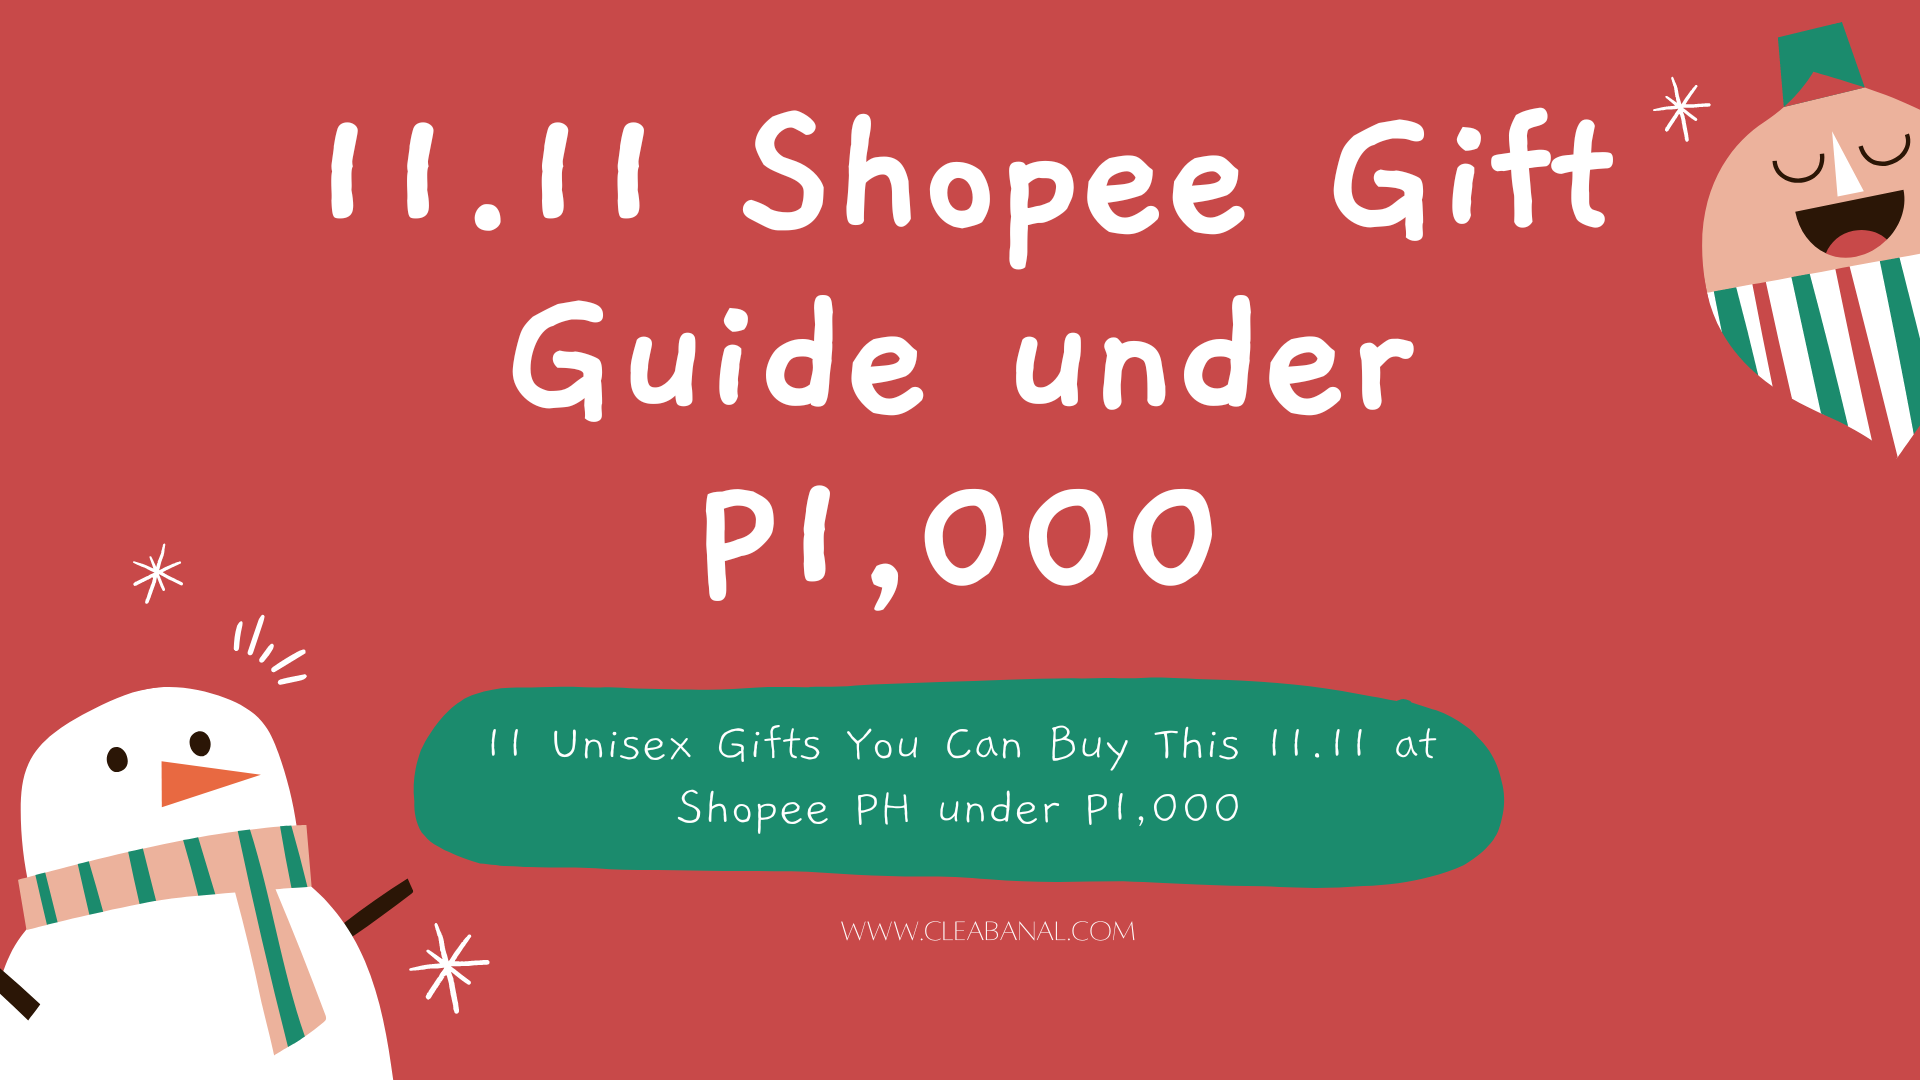 11 Unisex Gifts You Can Buy at Shopee 11.11 Under P1,000